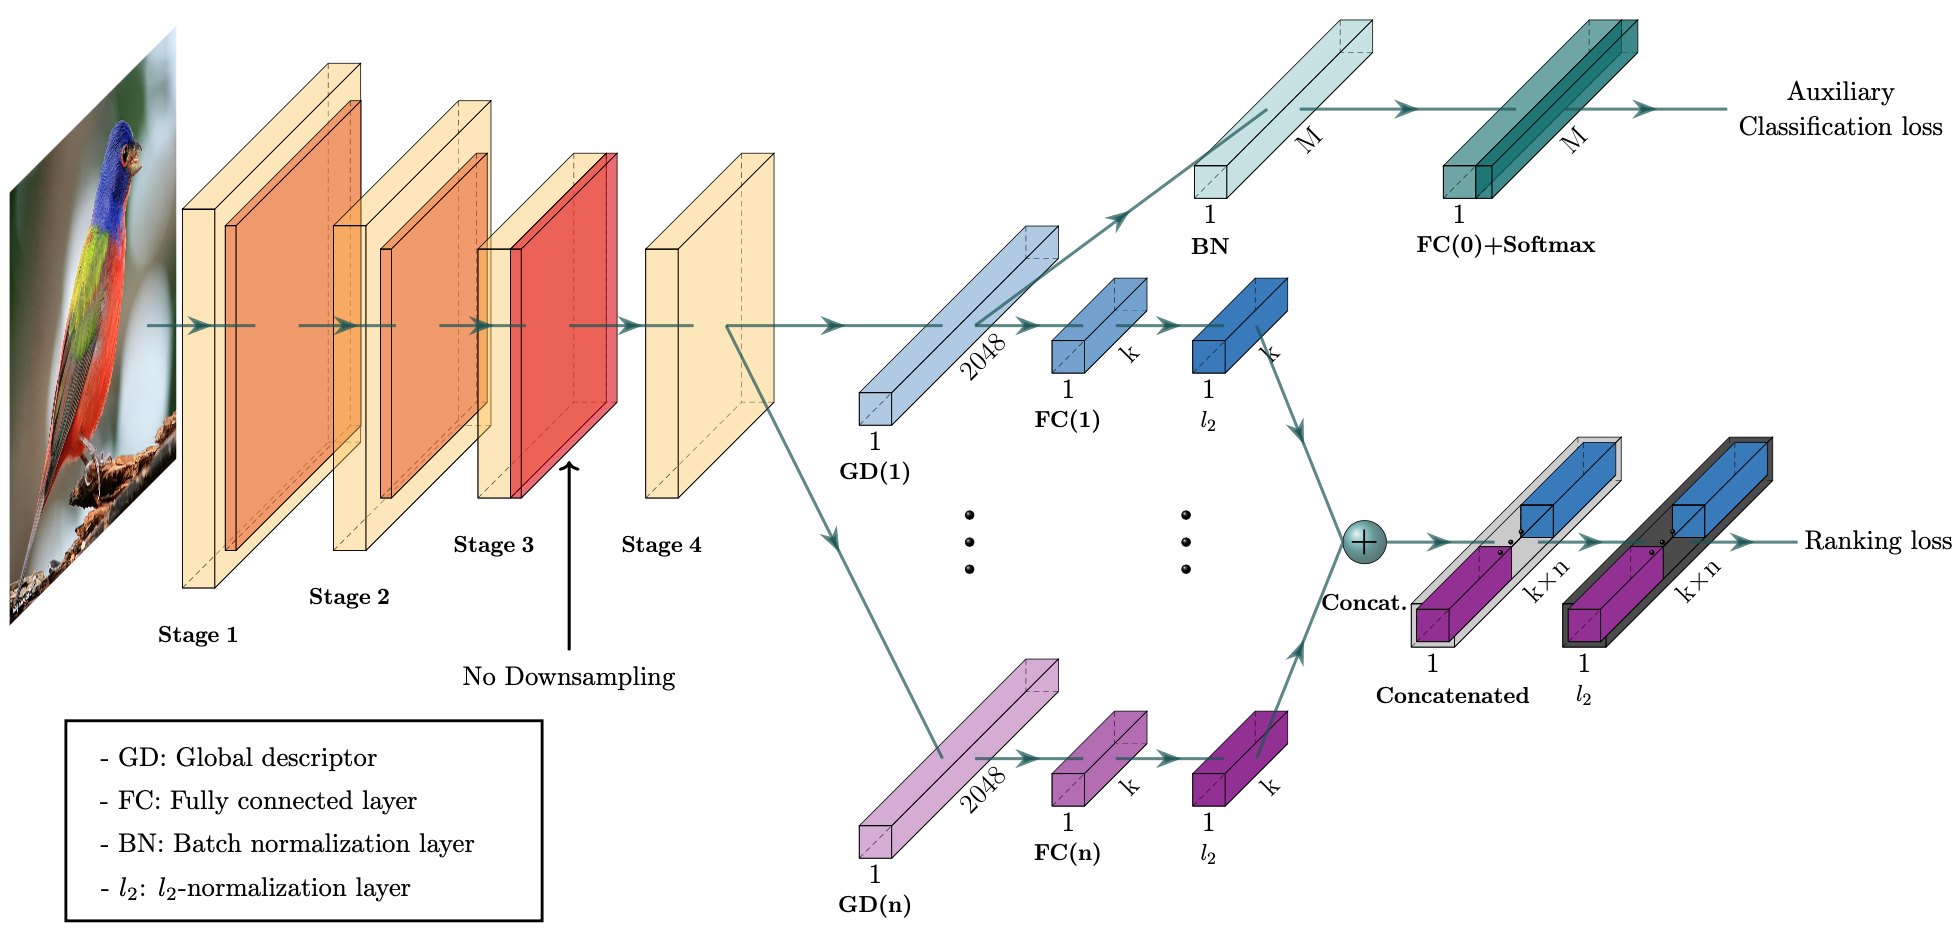 Network Architecture image from the paper